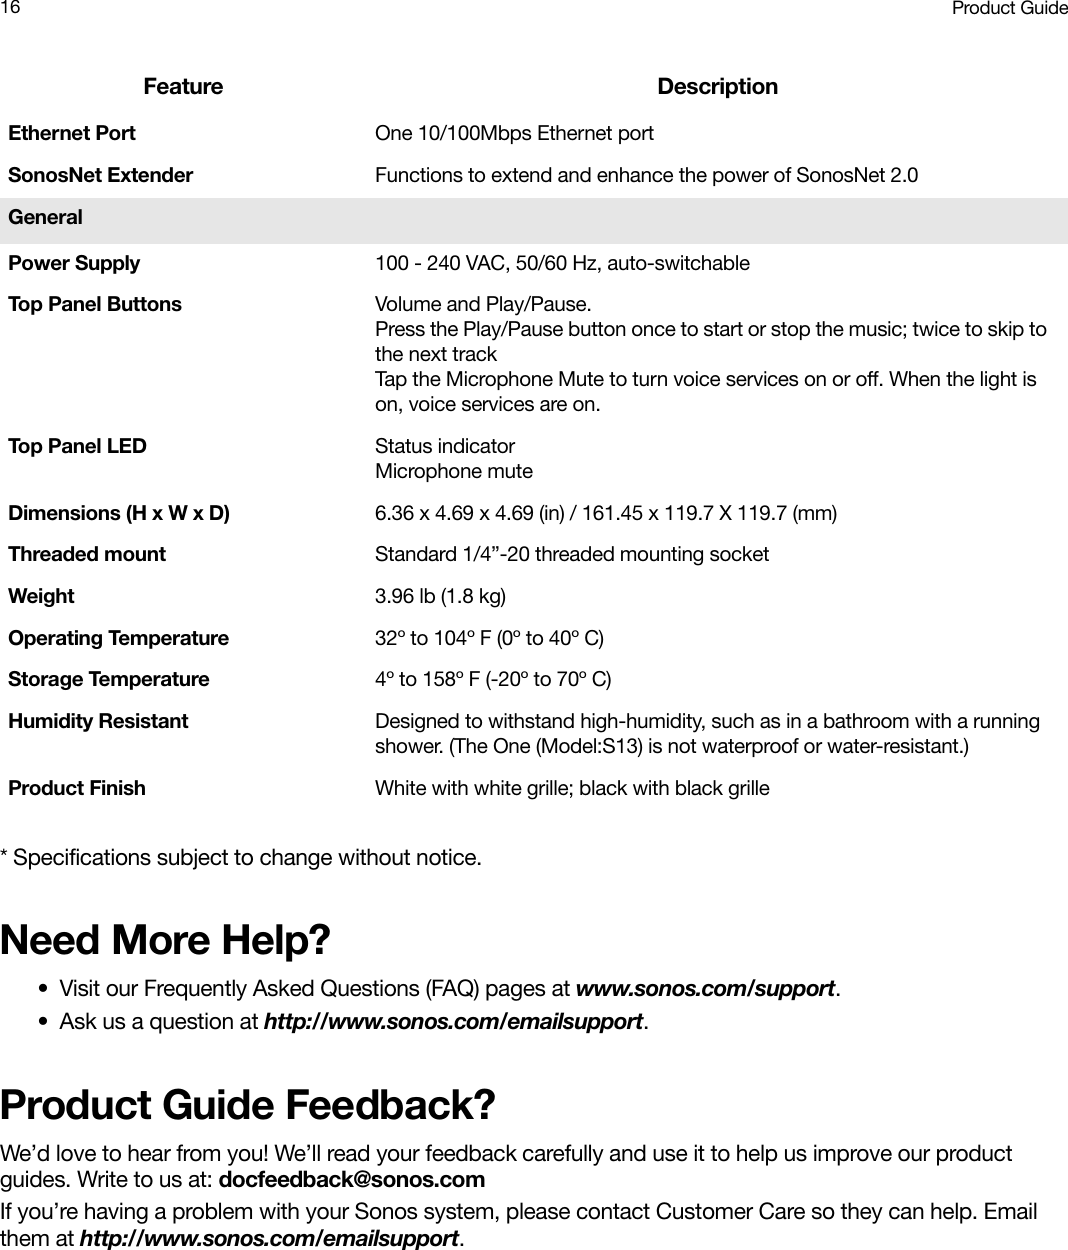 Product Guide16* Specifications subject to change without notice.Need More Help?• Visit our Frequently Asked Questions (FAQ) pages at www.sonos.com/support.• Ask us a question at http://www.sonos.com/emailsupport.Product Guide Feedback?We’d love to hear from you! We’ll read your feedback carefully and use it to help us improve our product guides. Write to us at: docfeedback@sonos.com If you’re having a problem with your Sonos system, please contact Customer Care so they can help. Email them at http://www.sonos.com/emailsupport.Ethernet Port One 10/100Mbps Ethernet portSonosNet Extender Functions to extend and enhance the power of SonosNet 2.0GeneralPower Supply 100 - 240 VAC, 50/60 Hz, auto-switchableTop Panel Buttons Volume and Play/Pause.  Press the Play/Pause button once to start or stop the music; twice to skip to the next trackTap the Microphone Mute to turn voice services on or off. When the light is on, voice services are on.Top Pan e l  L E D Status indicator Microphone mute Dimensions (H x W x D) 6.36 x 4.69 x 4.69 (in) / 161.45 x 119.7 X 119.7 (mm)Threaded mount  Standard 1/4”-20 threaded mounting socketWeight 3.96 lb (1.8 kg)Operating Temperature 32º to 104º F (0º to 40º C)Storage Temperature 4º to 158º F (-20º to 70º C)Humidity Resistant Designed to withstand high-humidity, such as in a bathroom with a running shower. (The One (Model:S13) is not waterproof or water-resistant.) Product Finish White with white grille; black with black grilleFeature Description